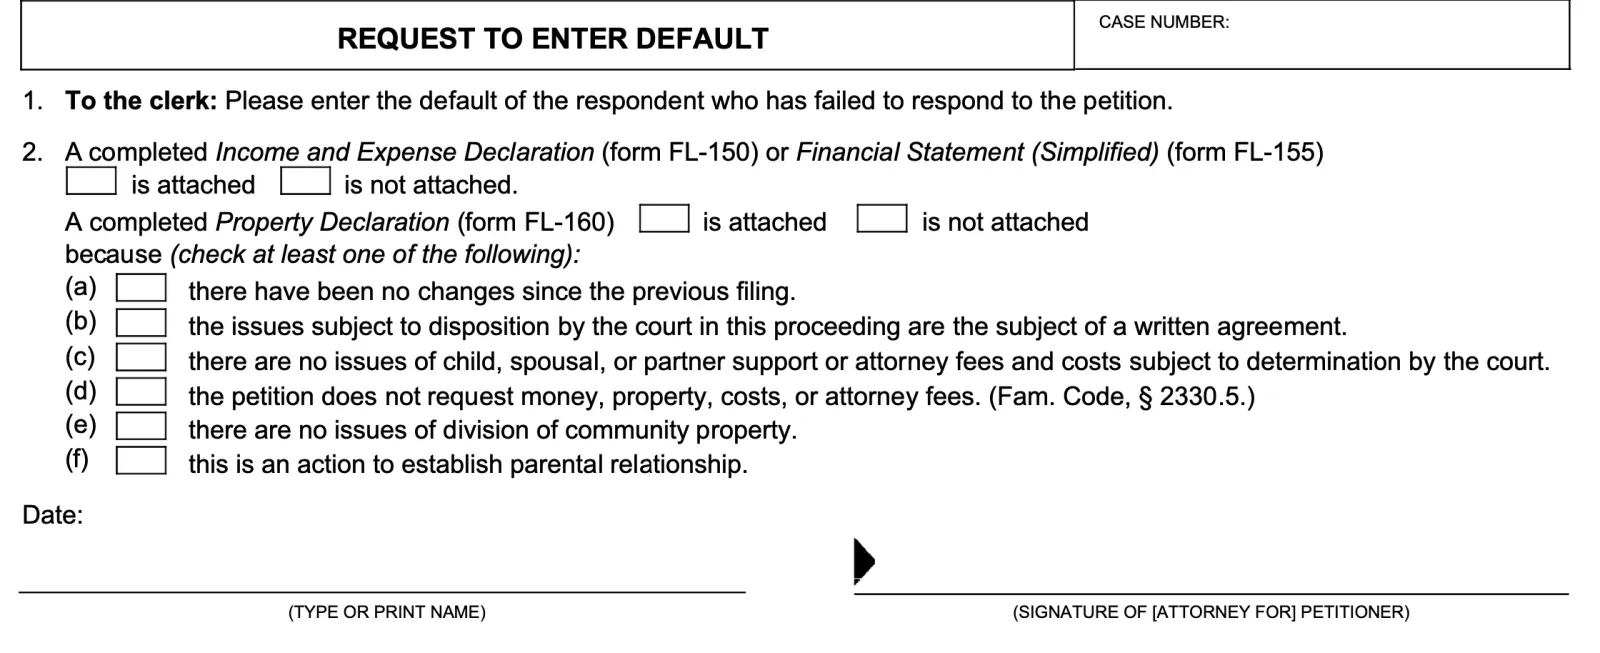 Front page of request to enter default form